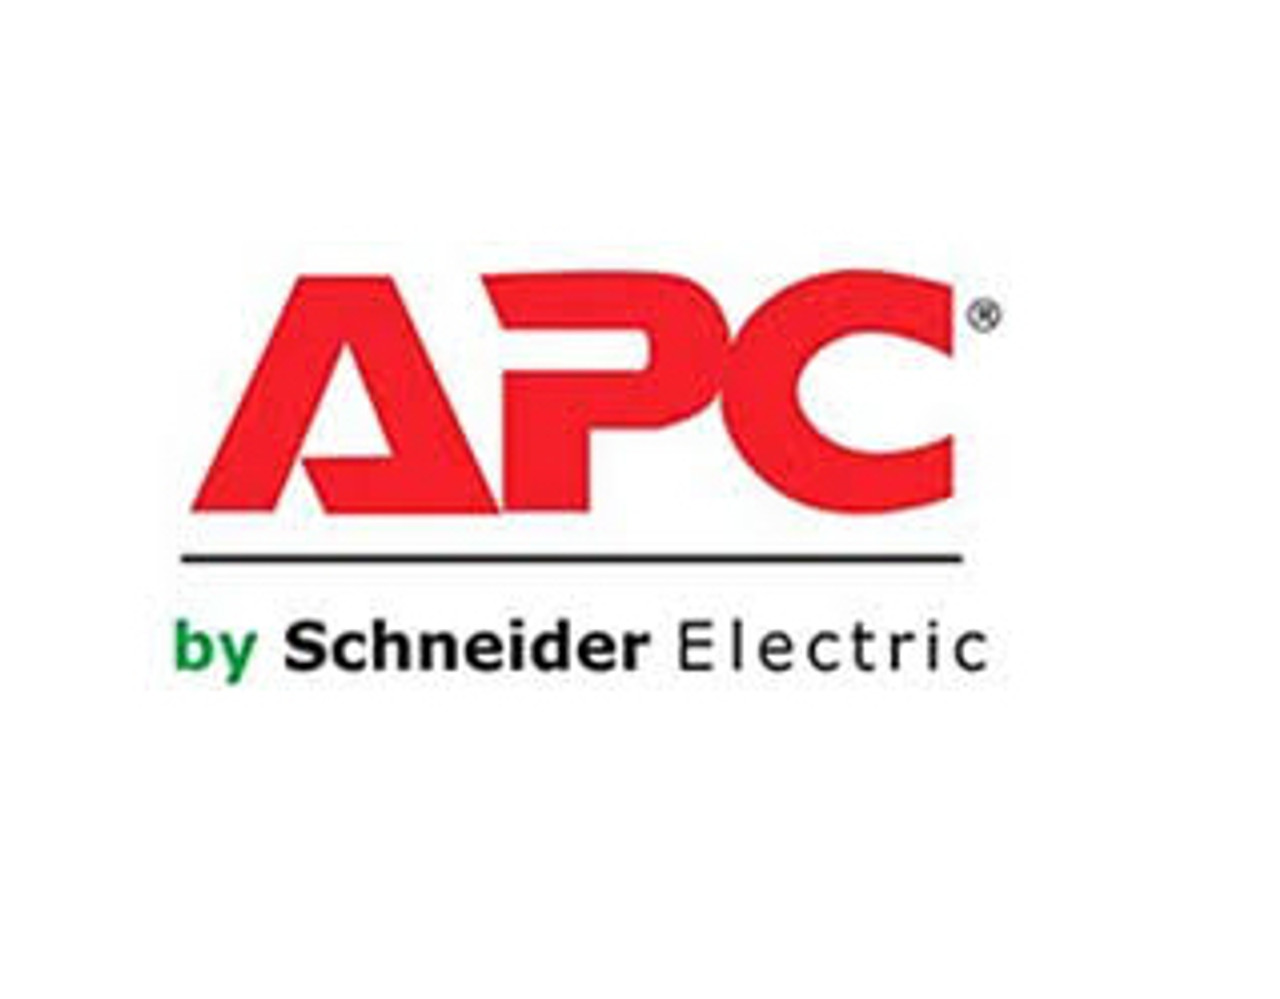 APC WTRAINING warranty/support extension